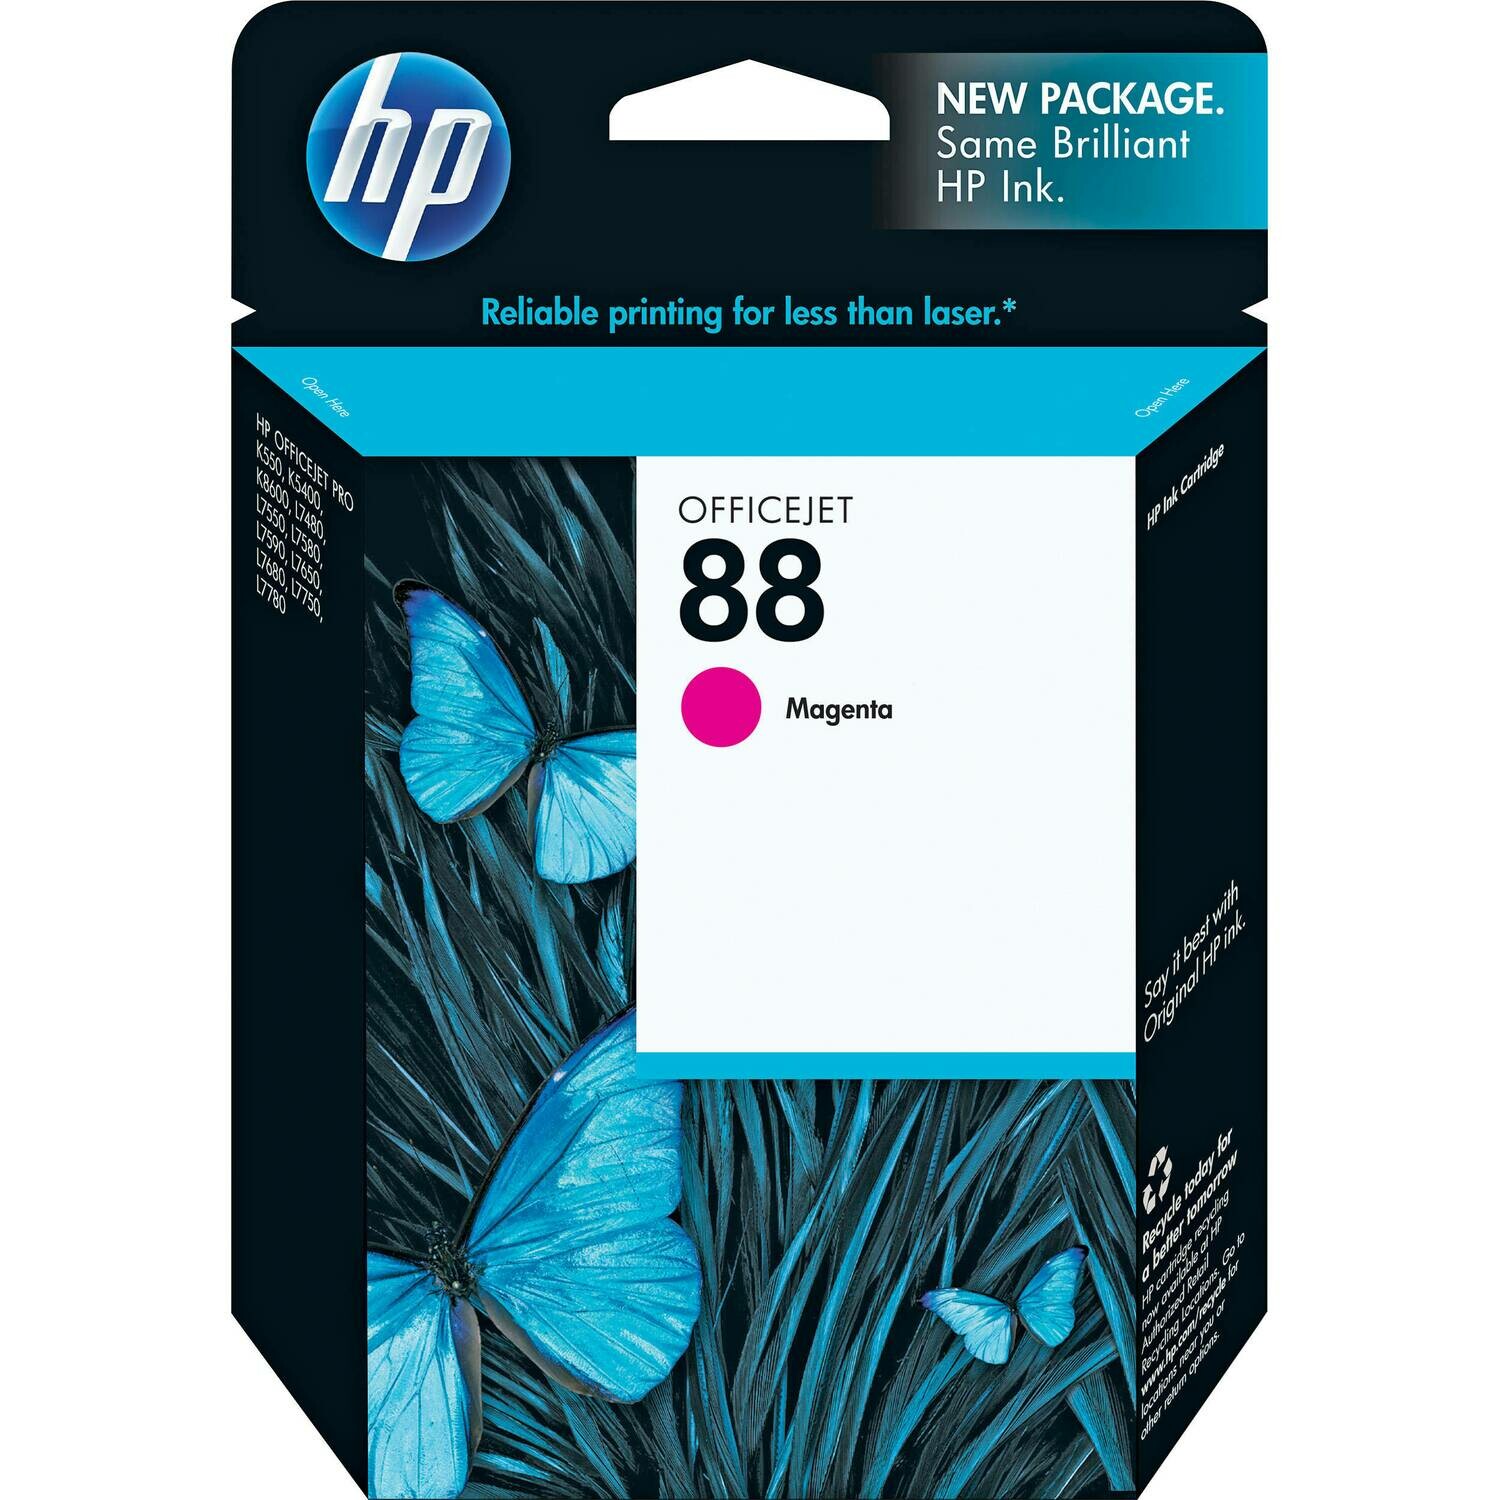 HP 88 MAGENTA-PRINTS UPTO 1000 PAGES